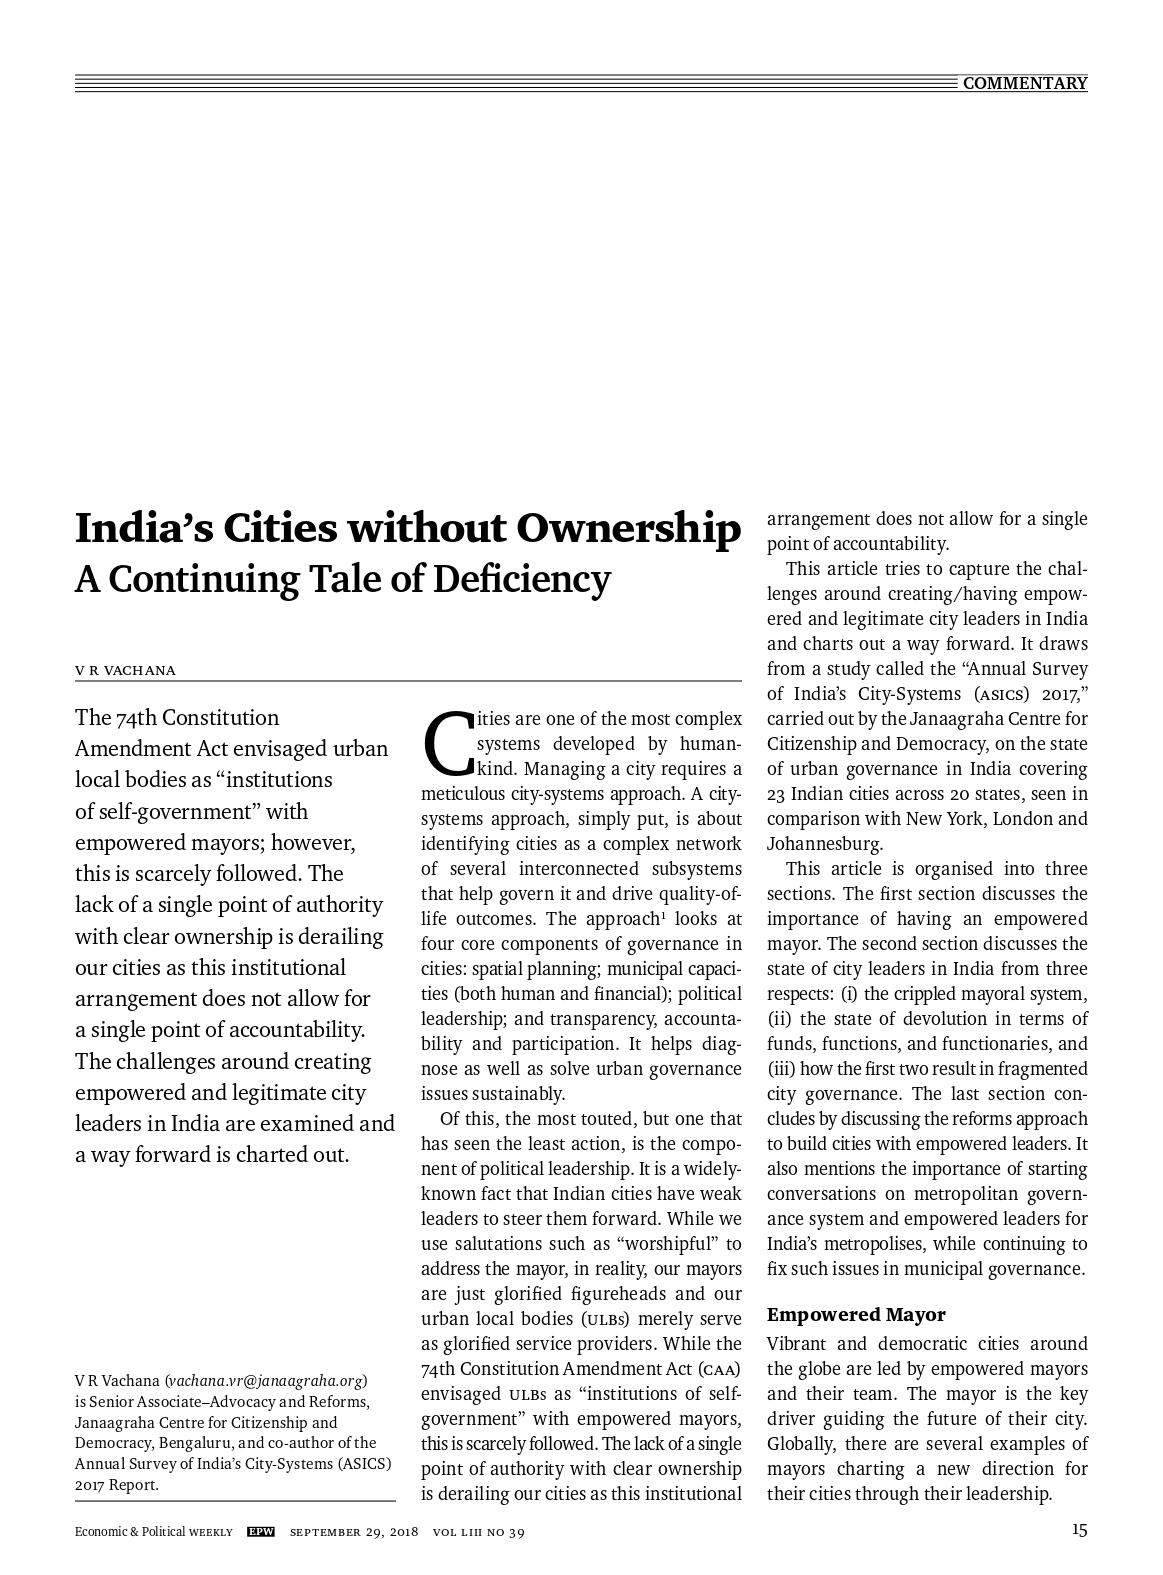 India’s Cities without OwnershipEPW September 2018By Vachana VR